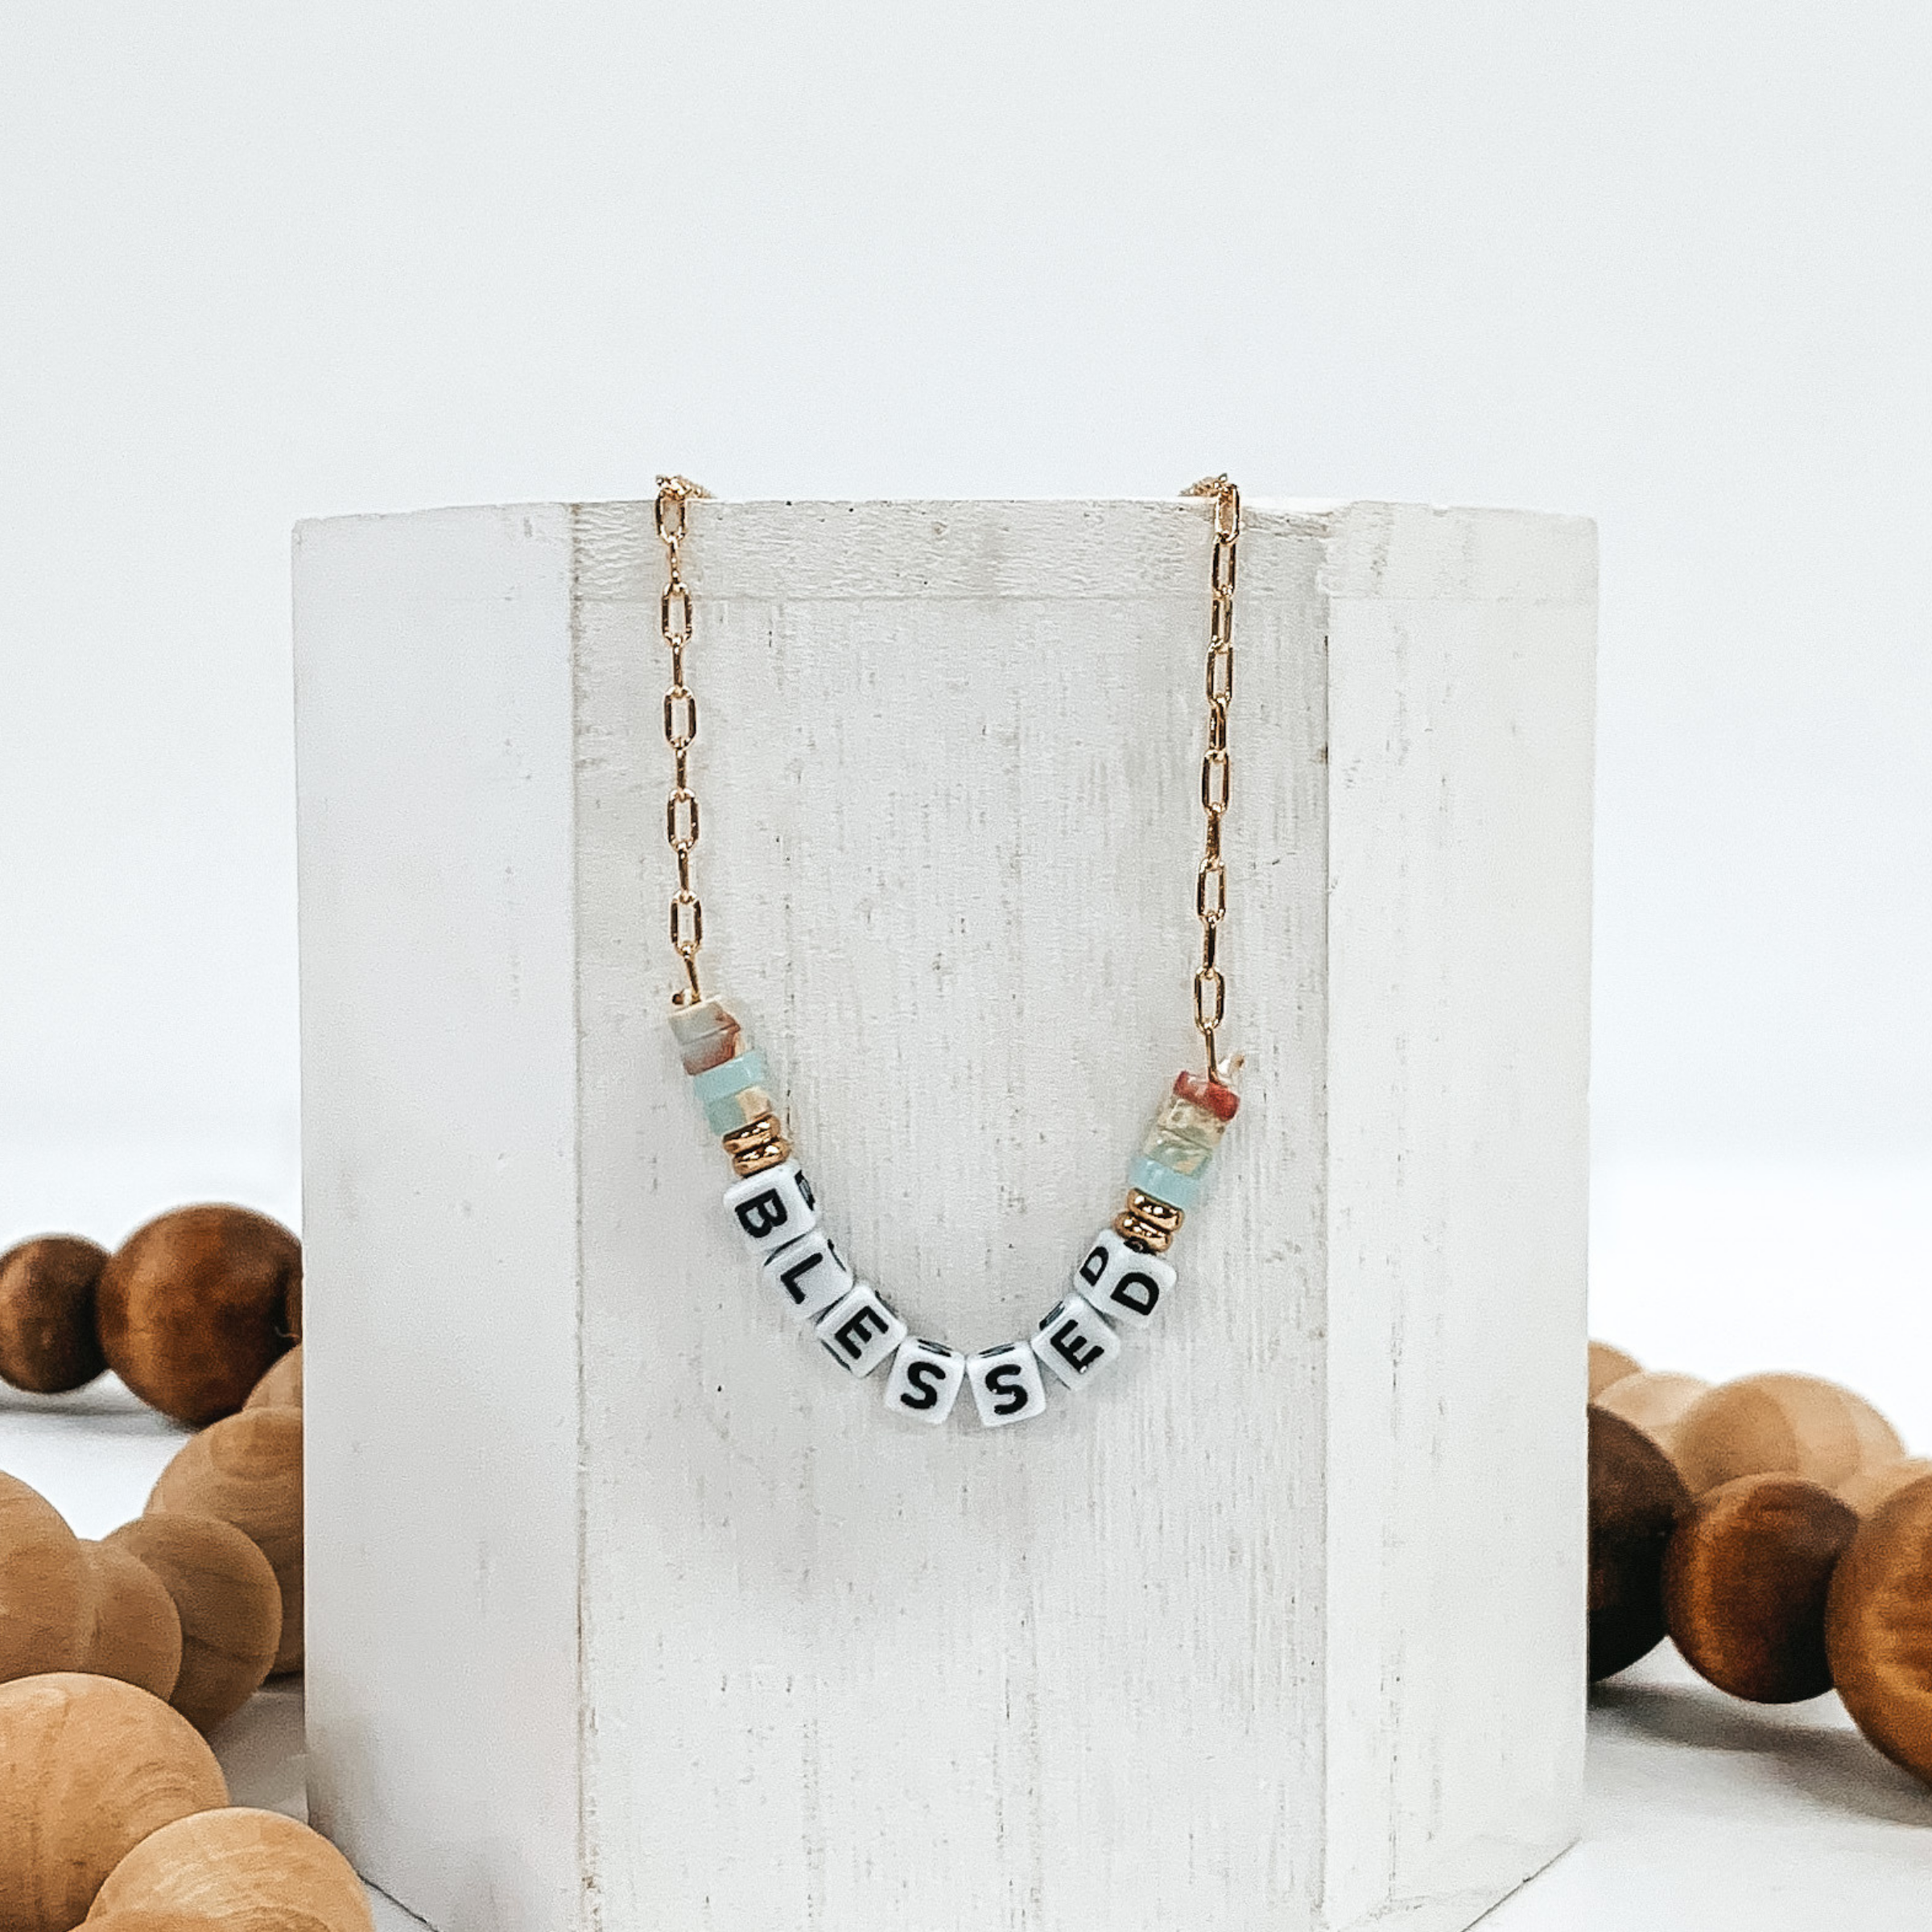 Small gold chain necklace with colorful marble beads, gold beads, and white letter beads that spell out "BLESSED". Pictured of a white block that is on a white background with tan and brown beads.